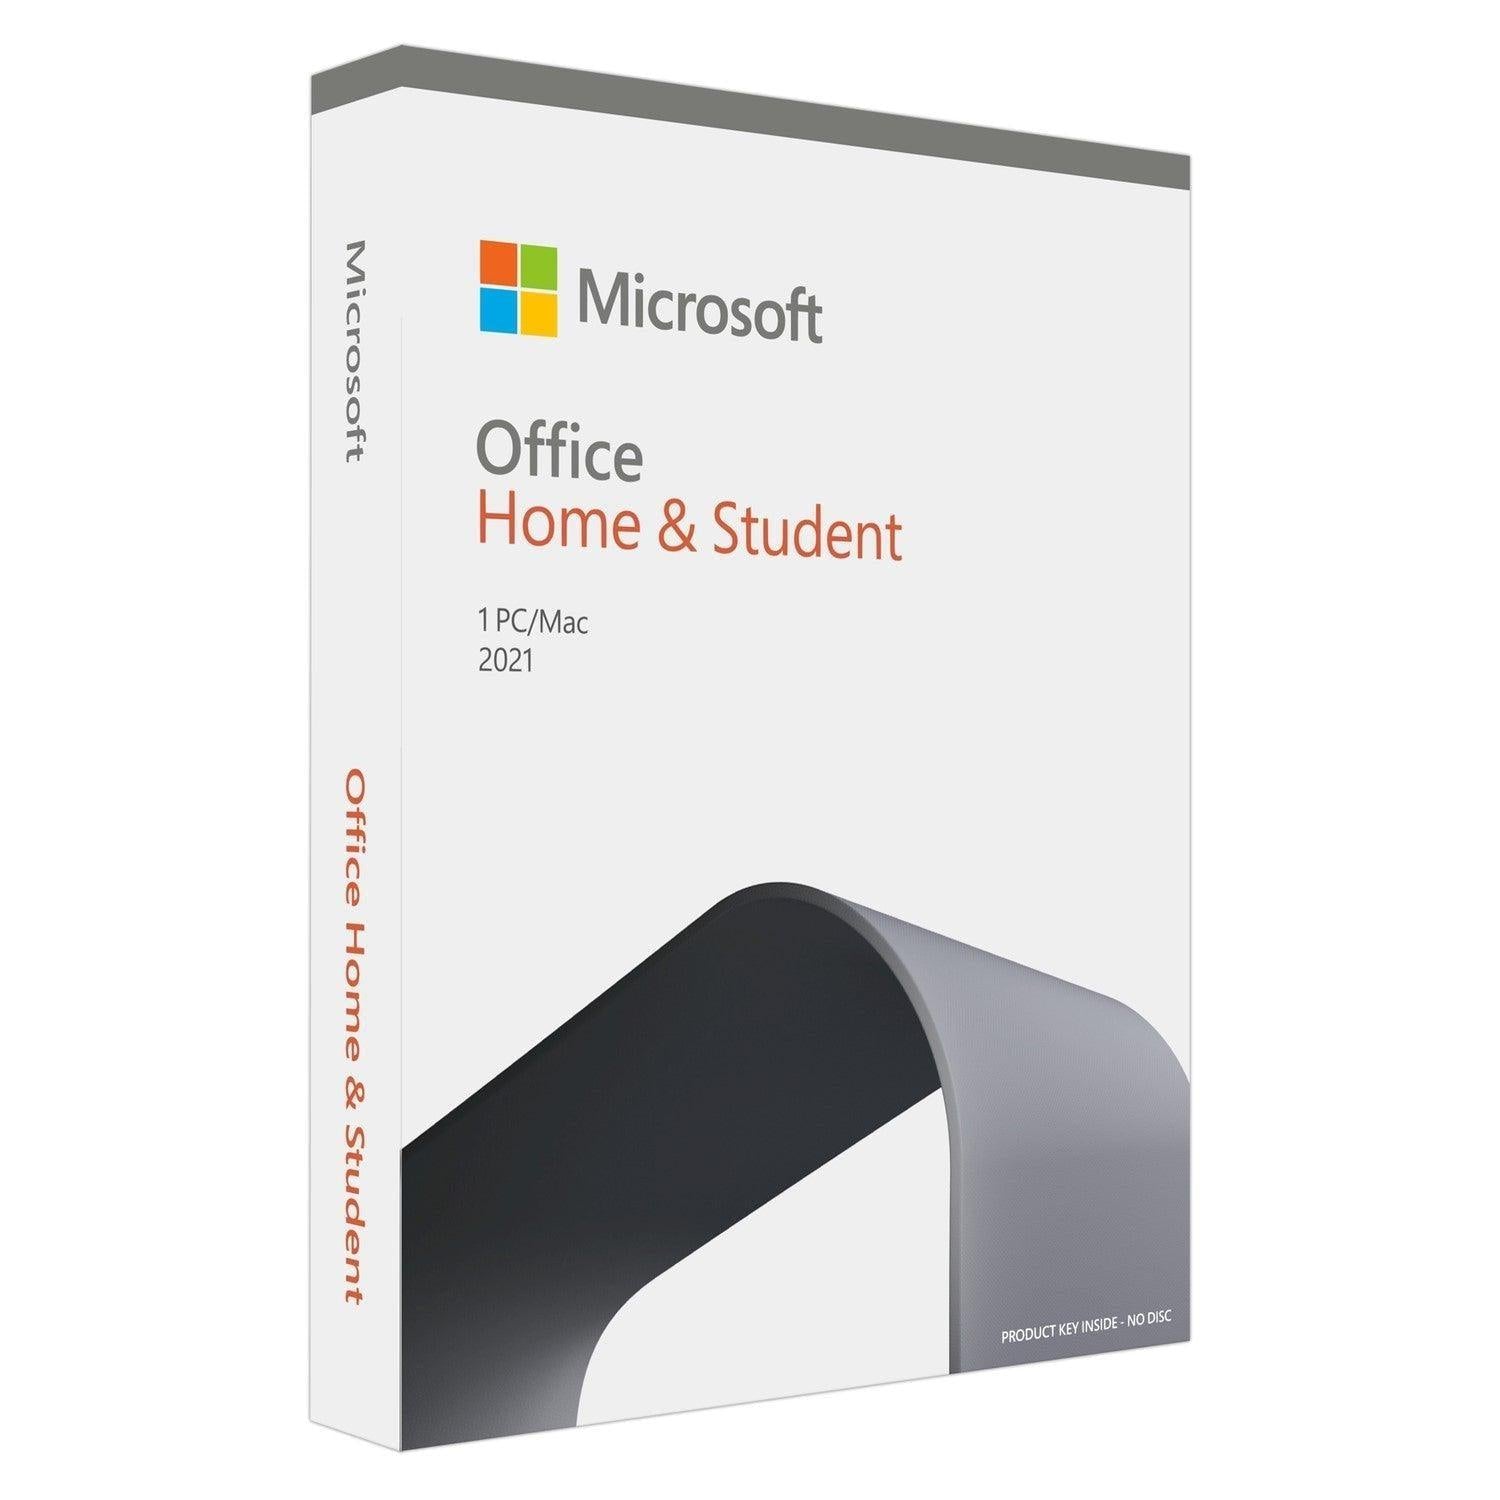 Microsoft Office 2021 Home & Student Software License | 79G-05388 (7500108726460)